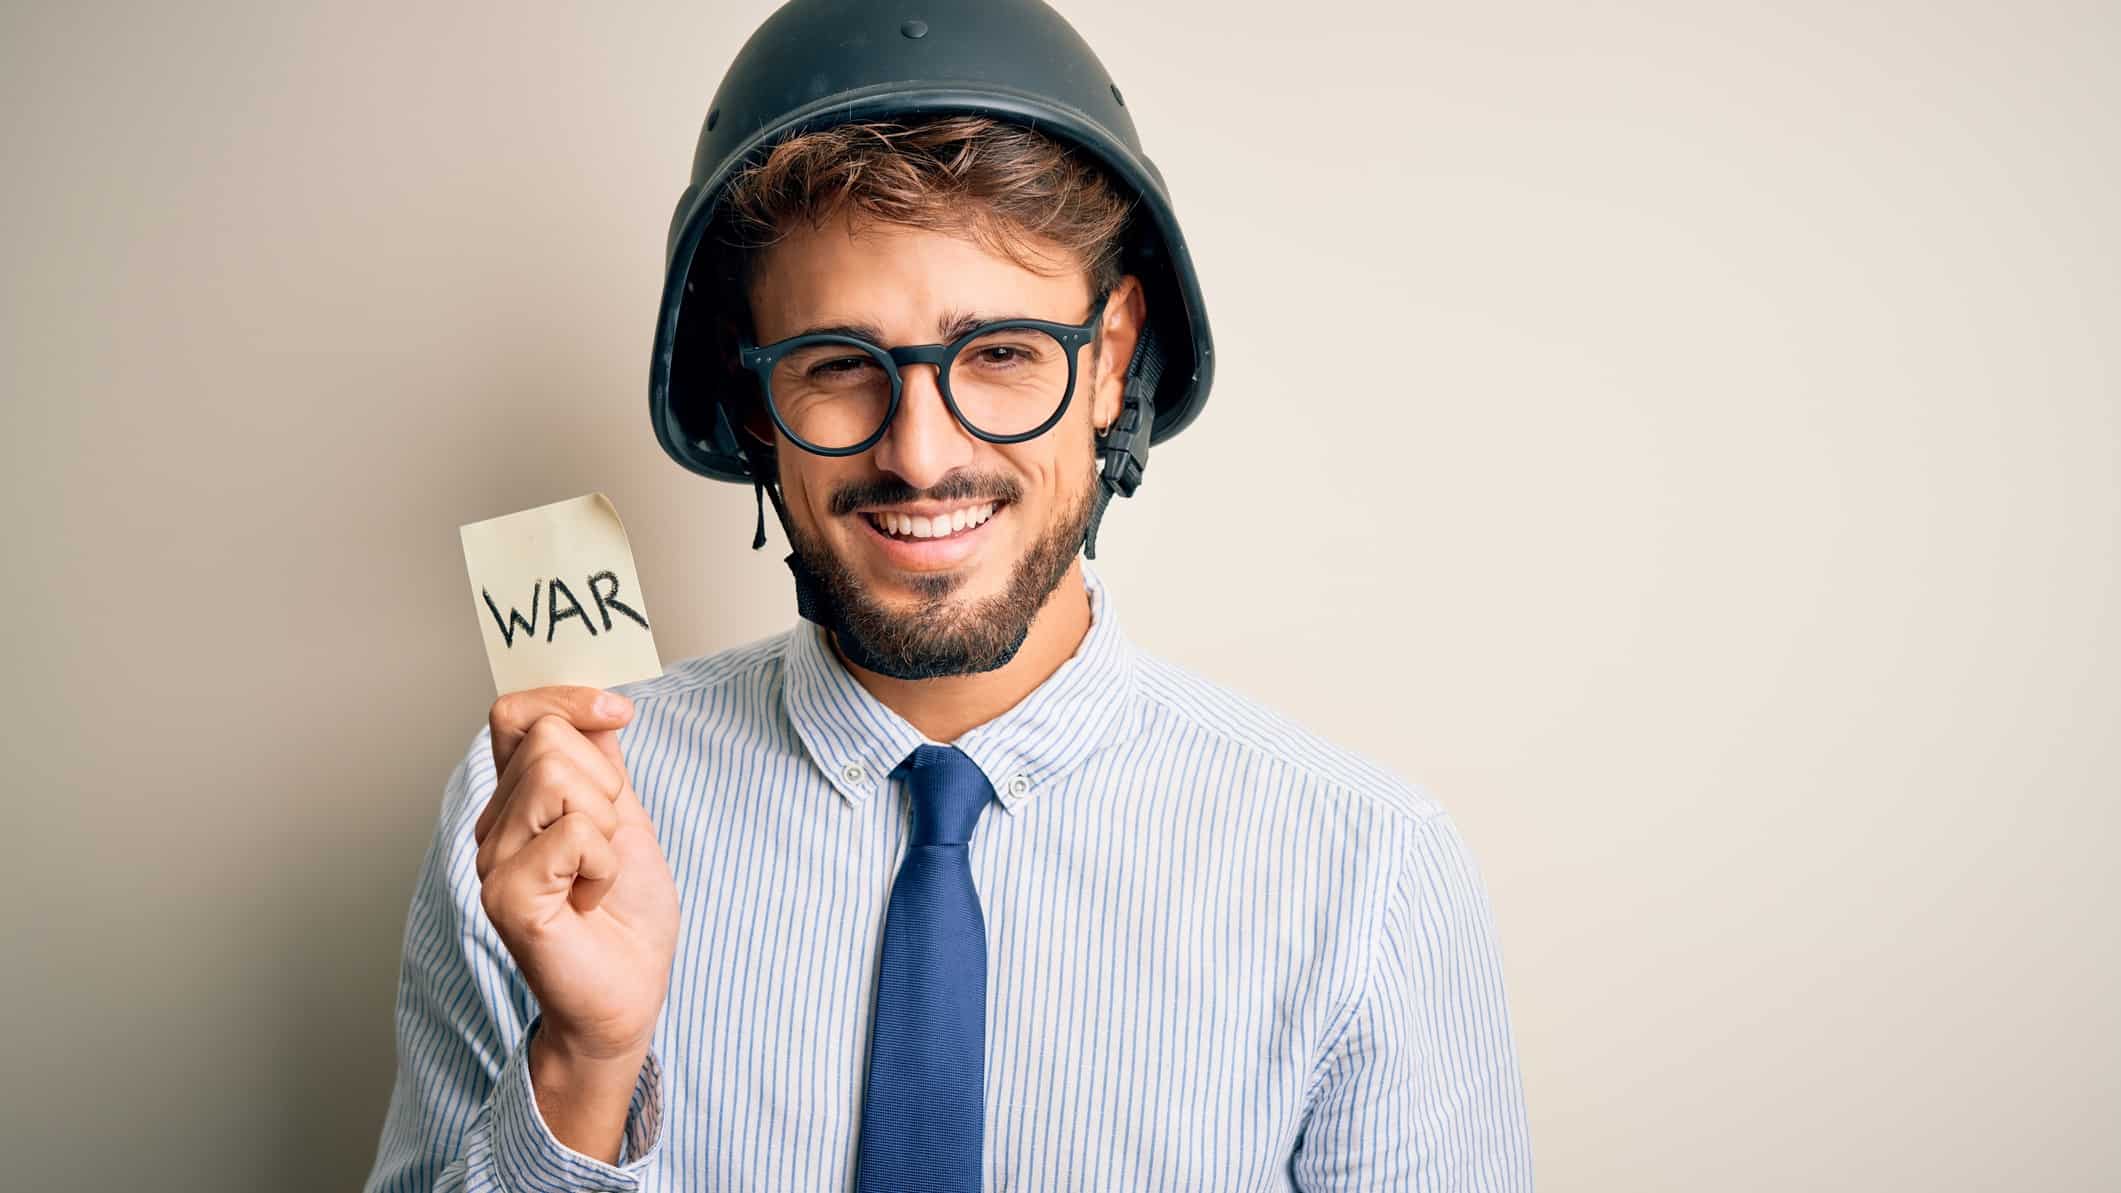 A smiling man wearing a hard hat holds a note that say WAR, indicating share price movement